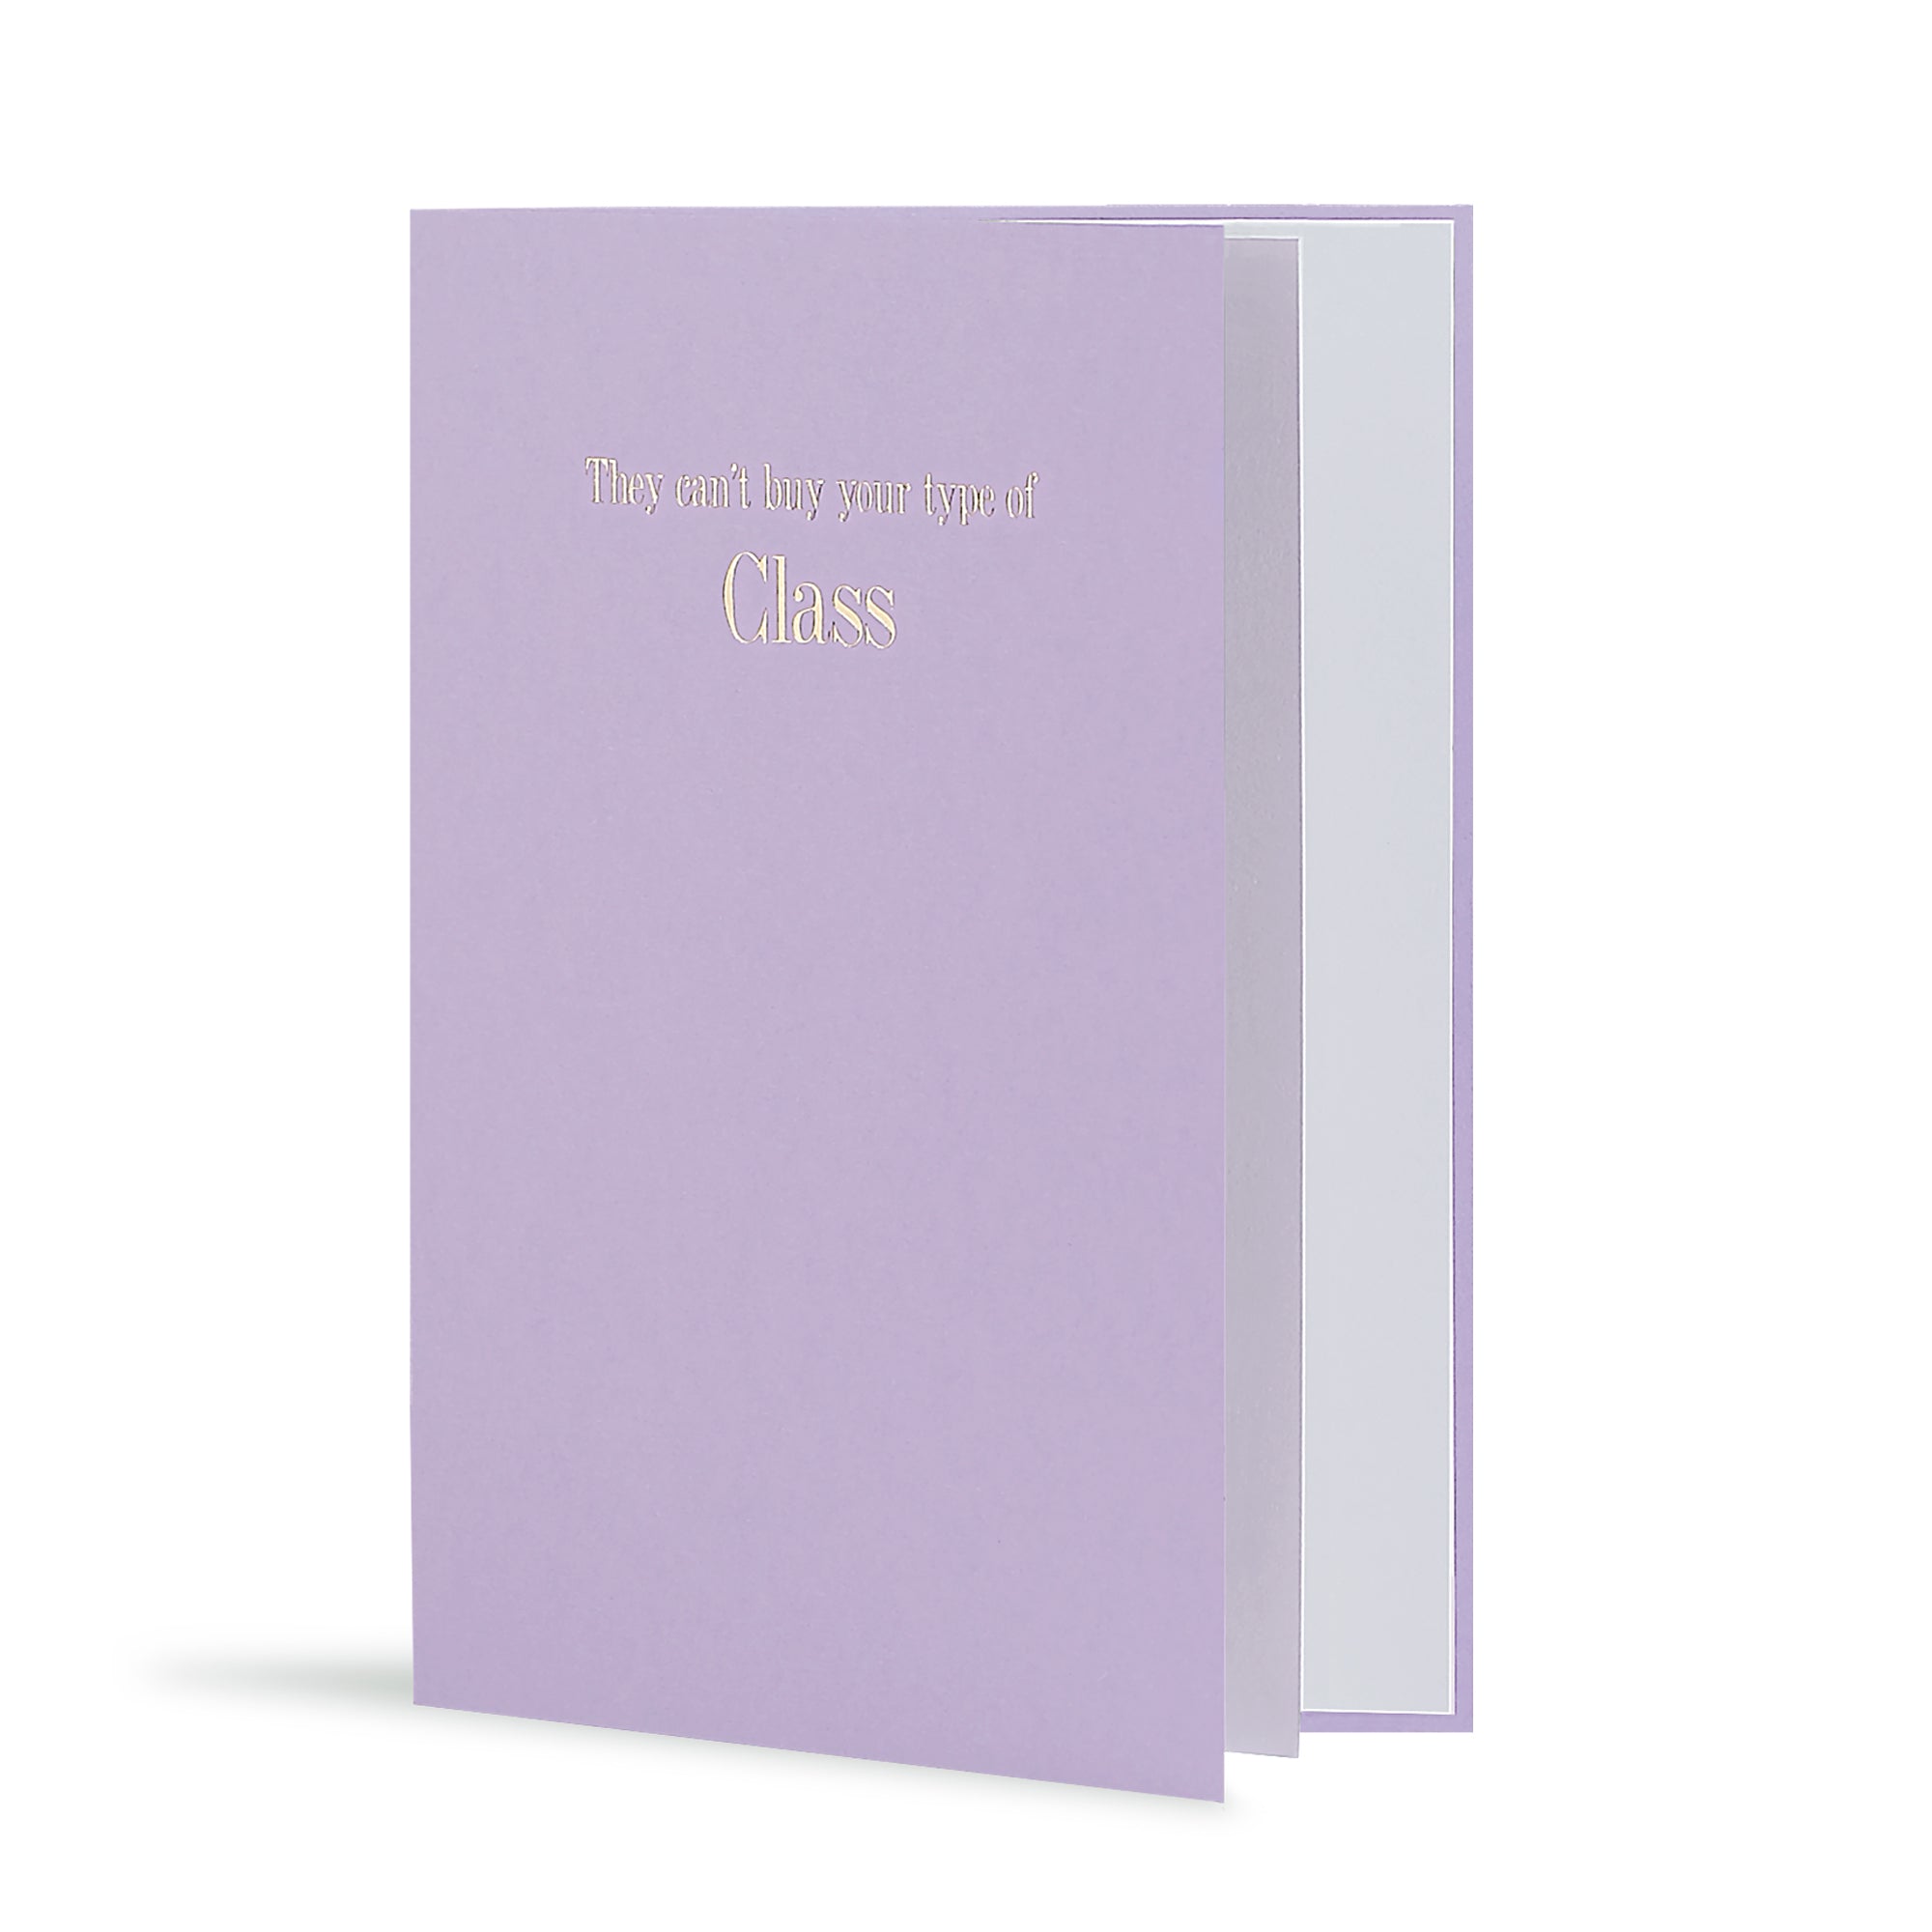 They Can't Buy Your Type of Class Greeting Card in Pastel Purple, Side